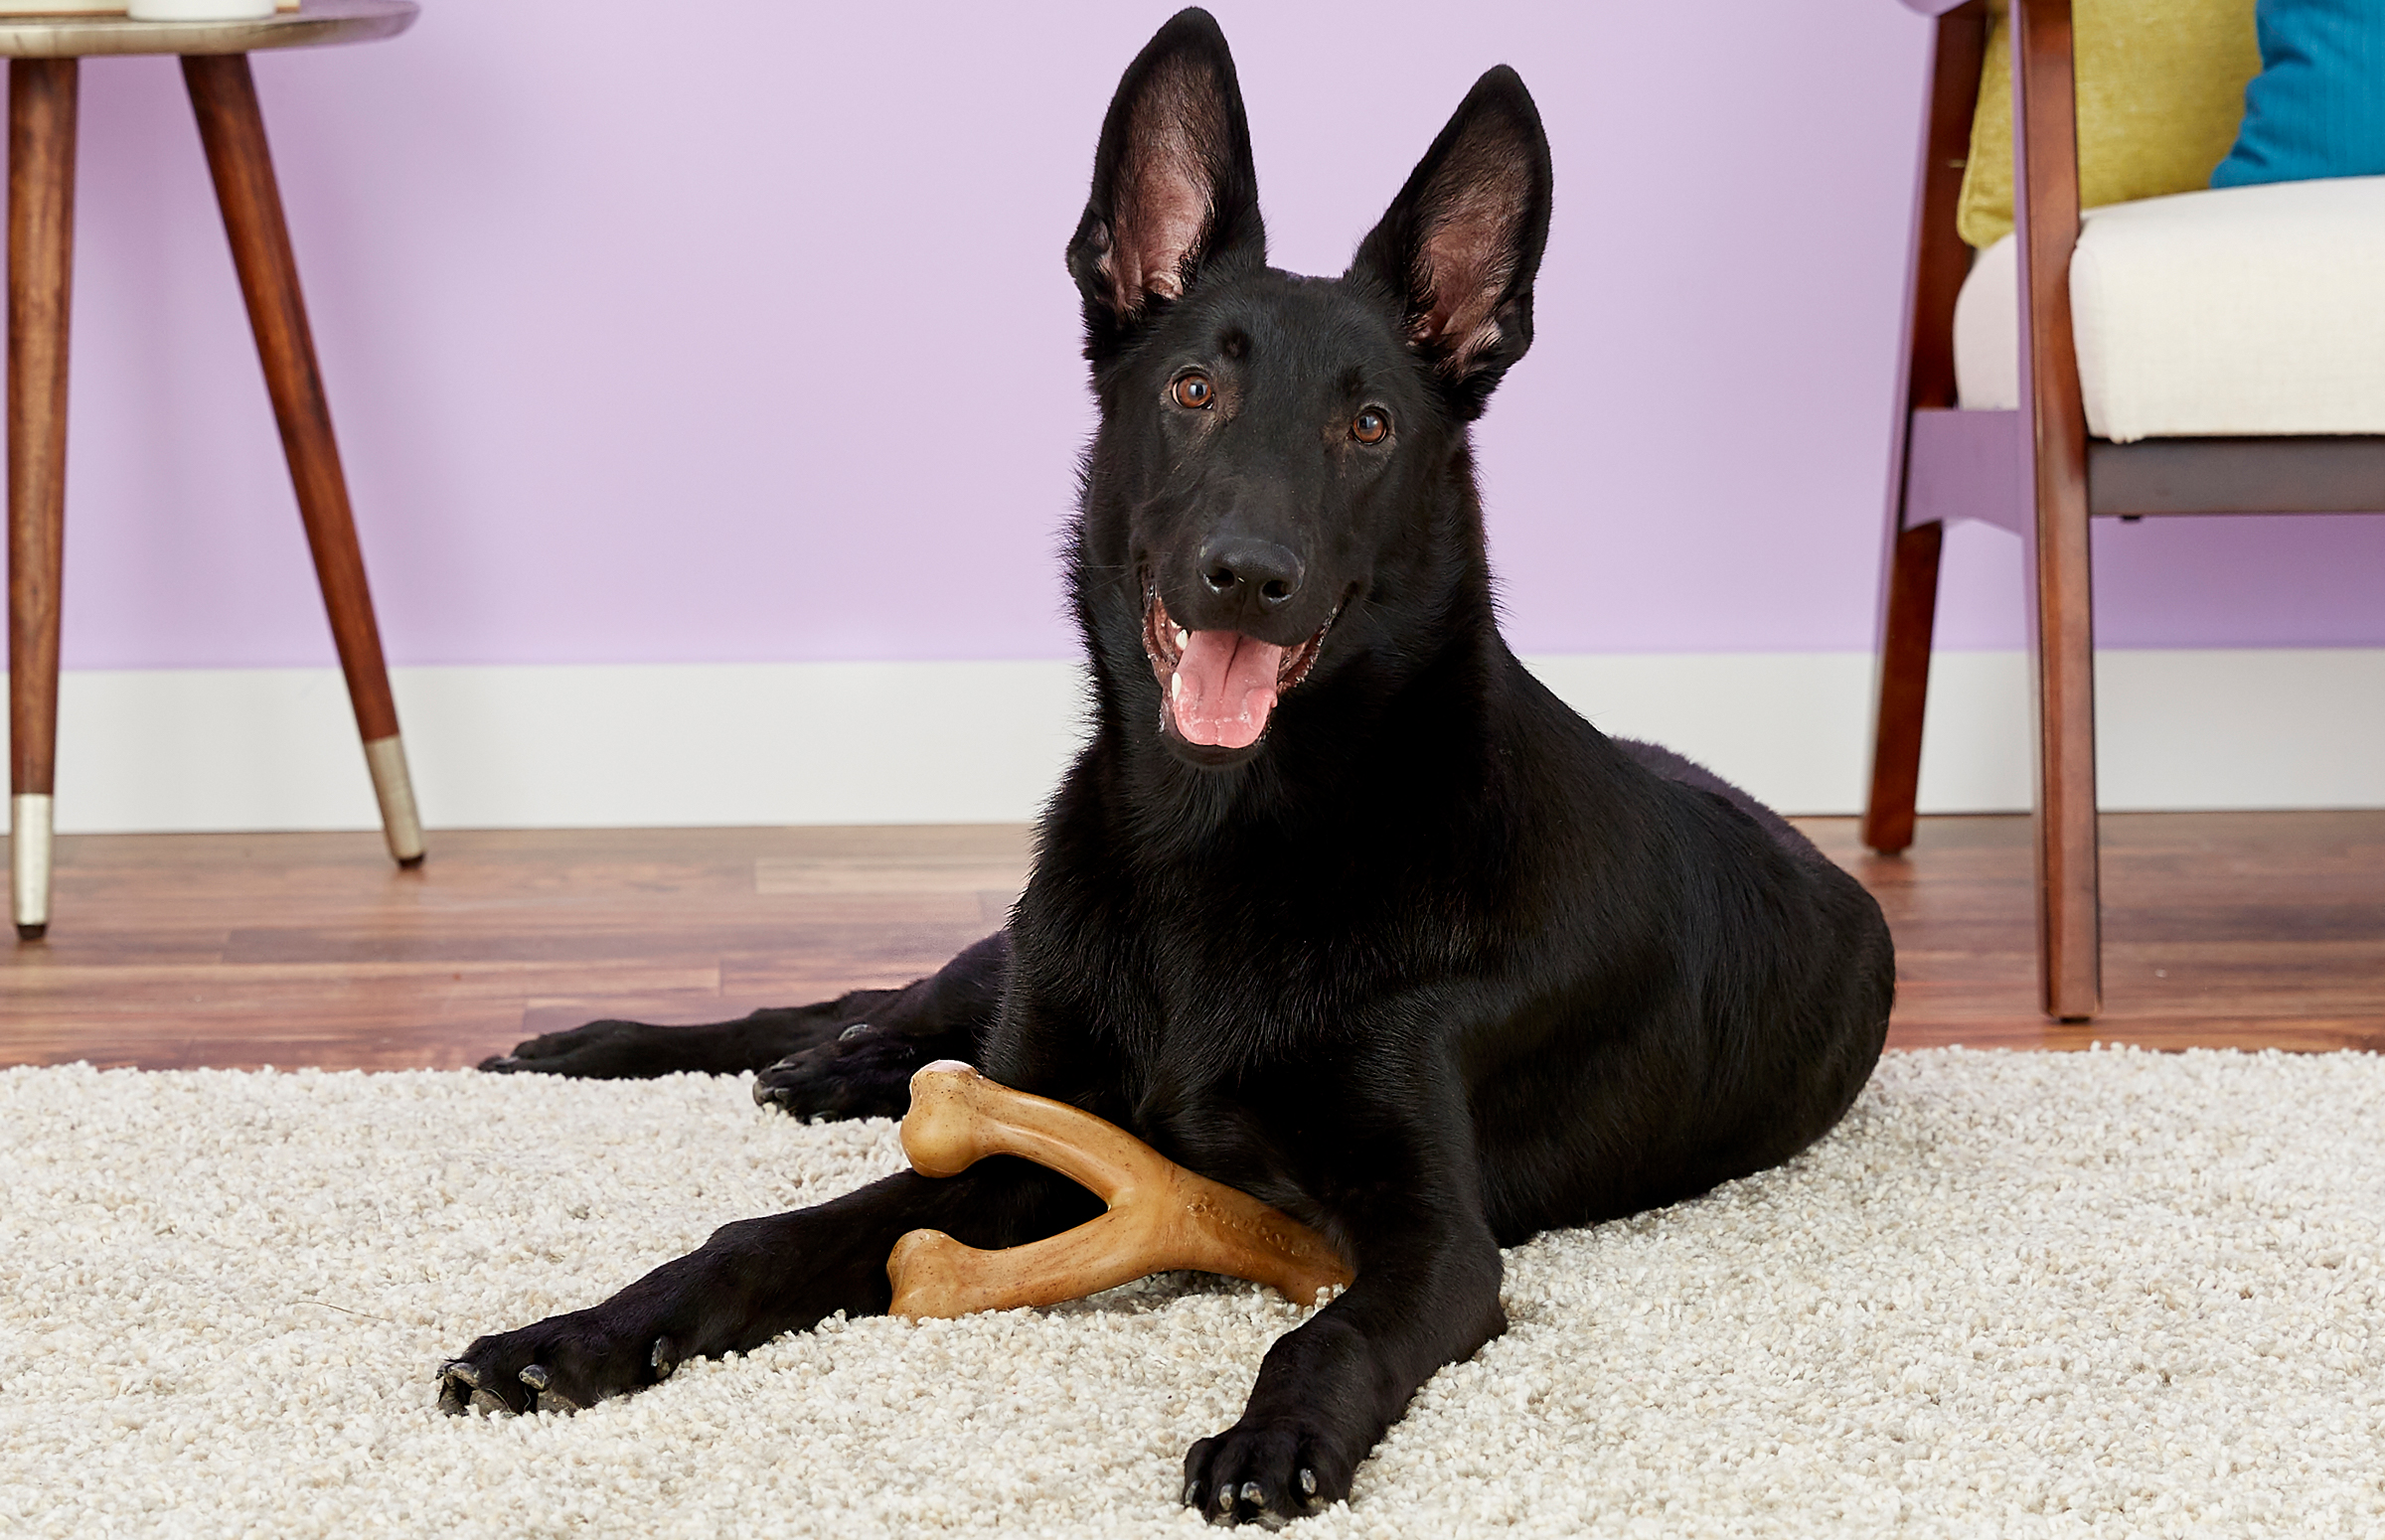 A happy black dog sits on the edge of the rug with its toy